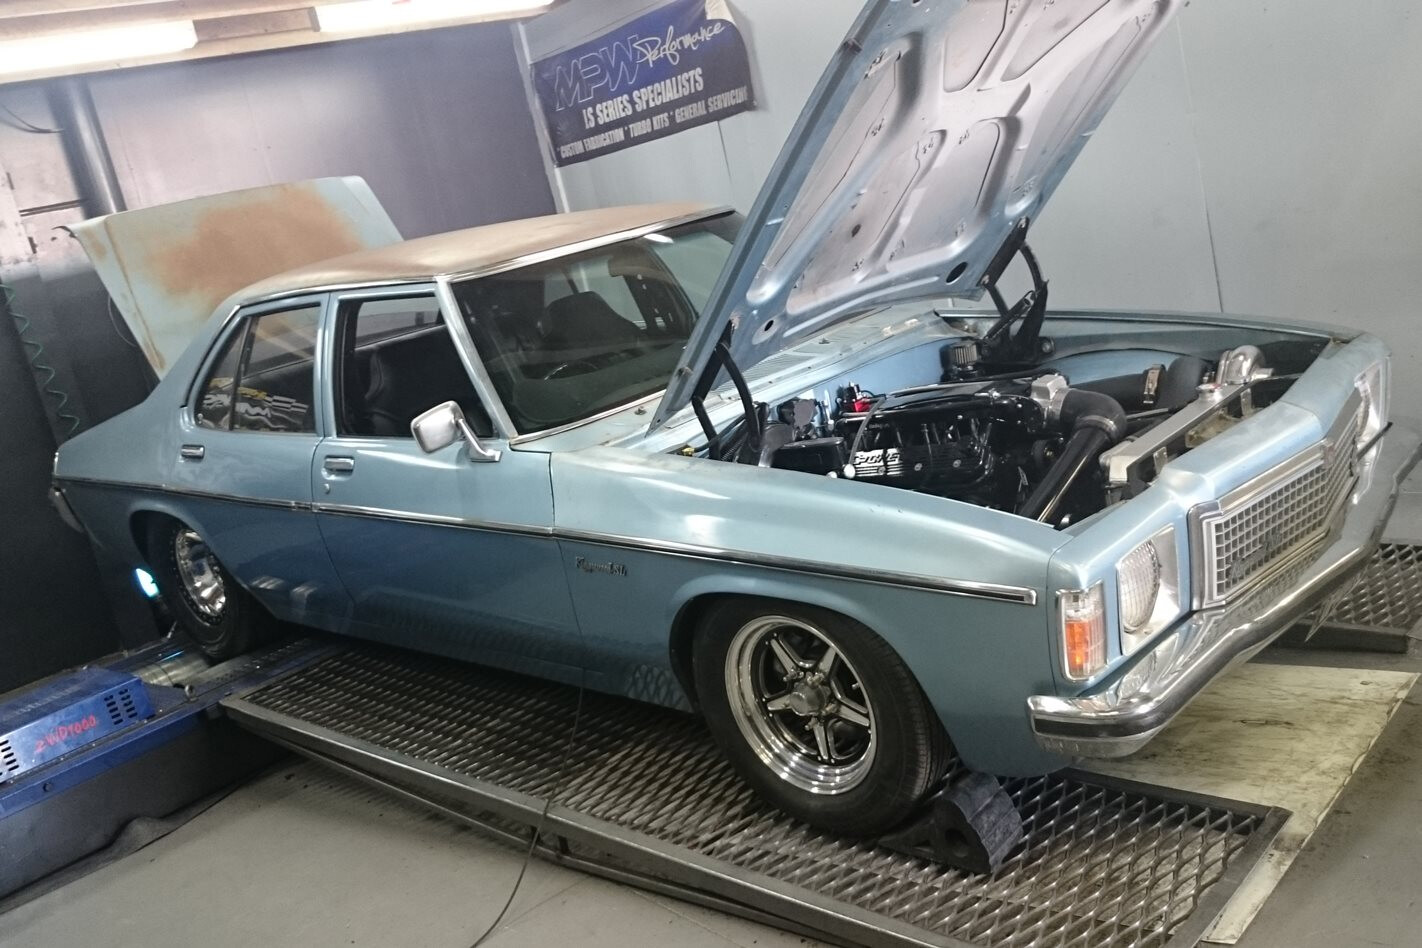 CRUSTY HOLDEN KINGSWOOD MAKES OVER 850HP AT THE WHEELS